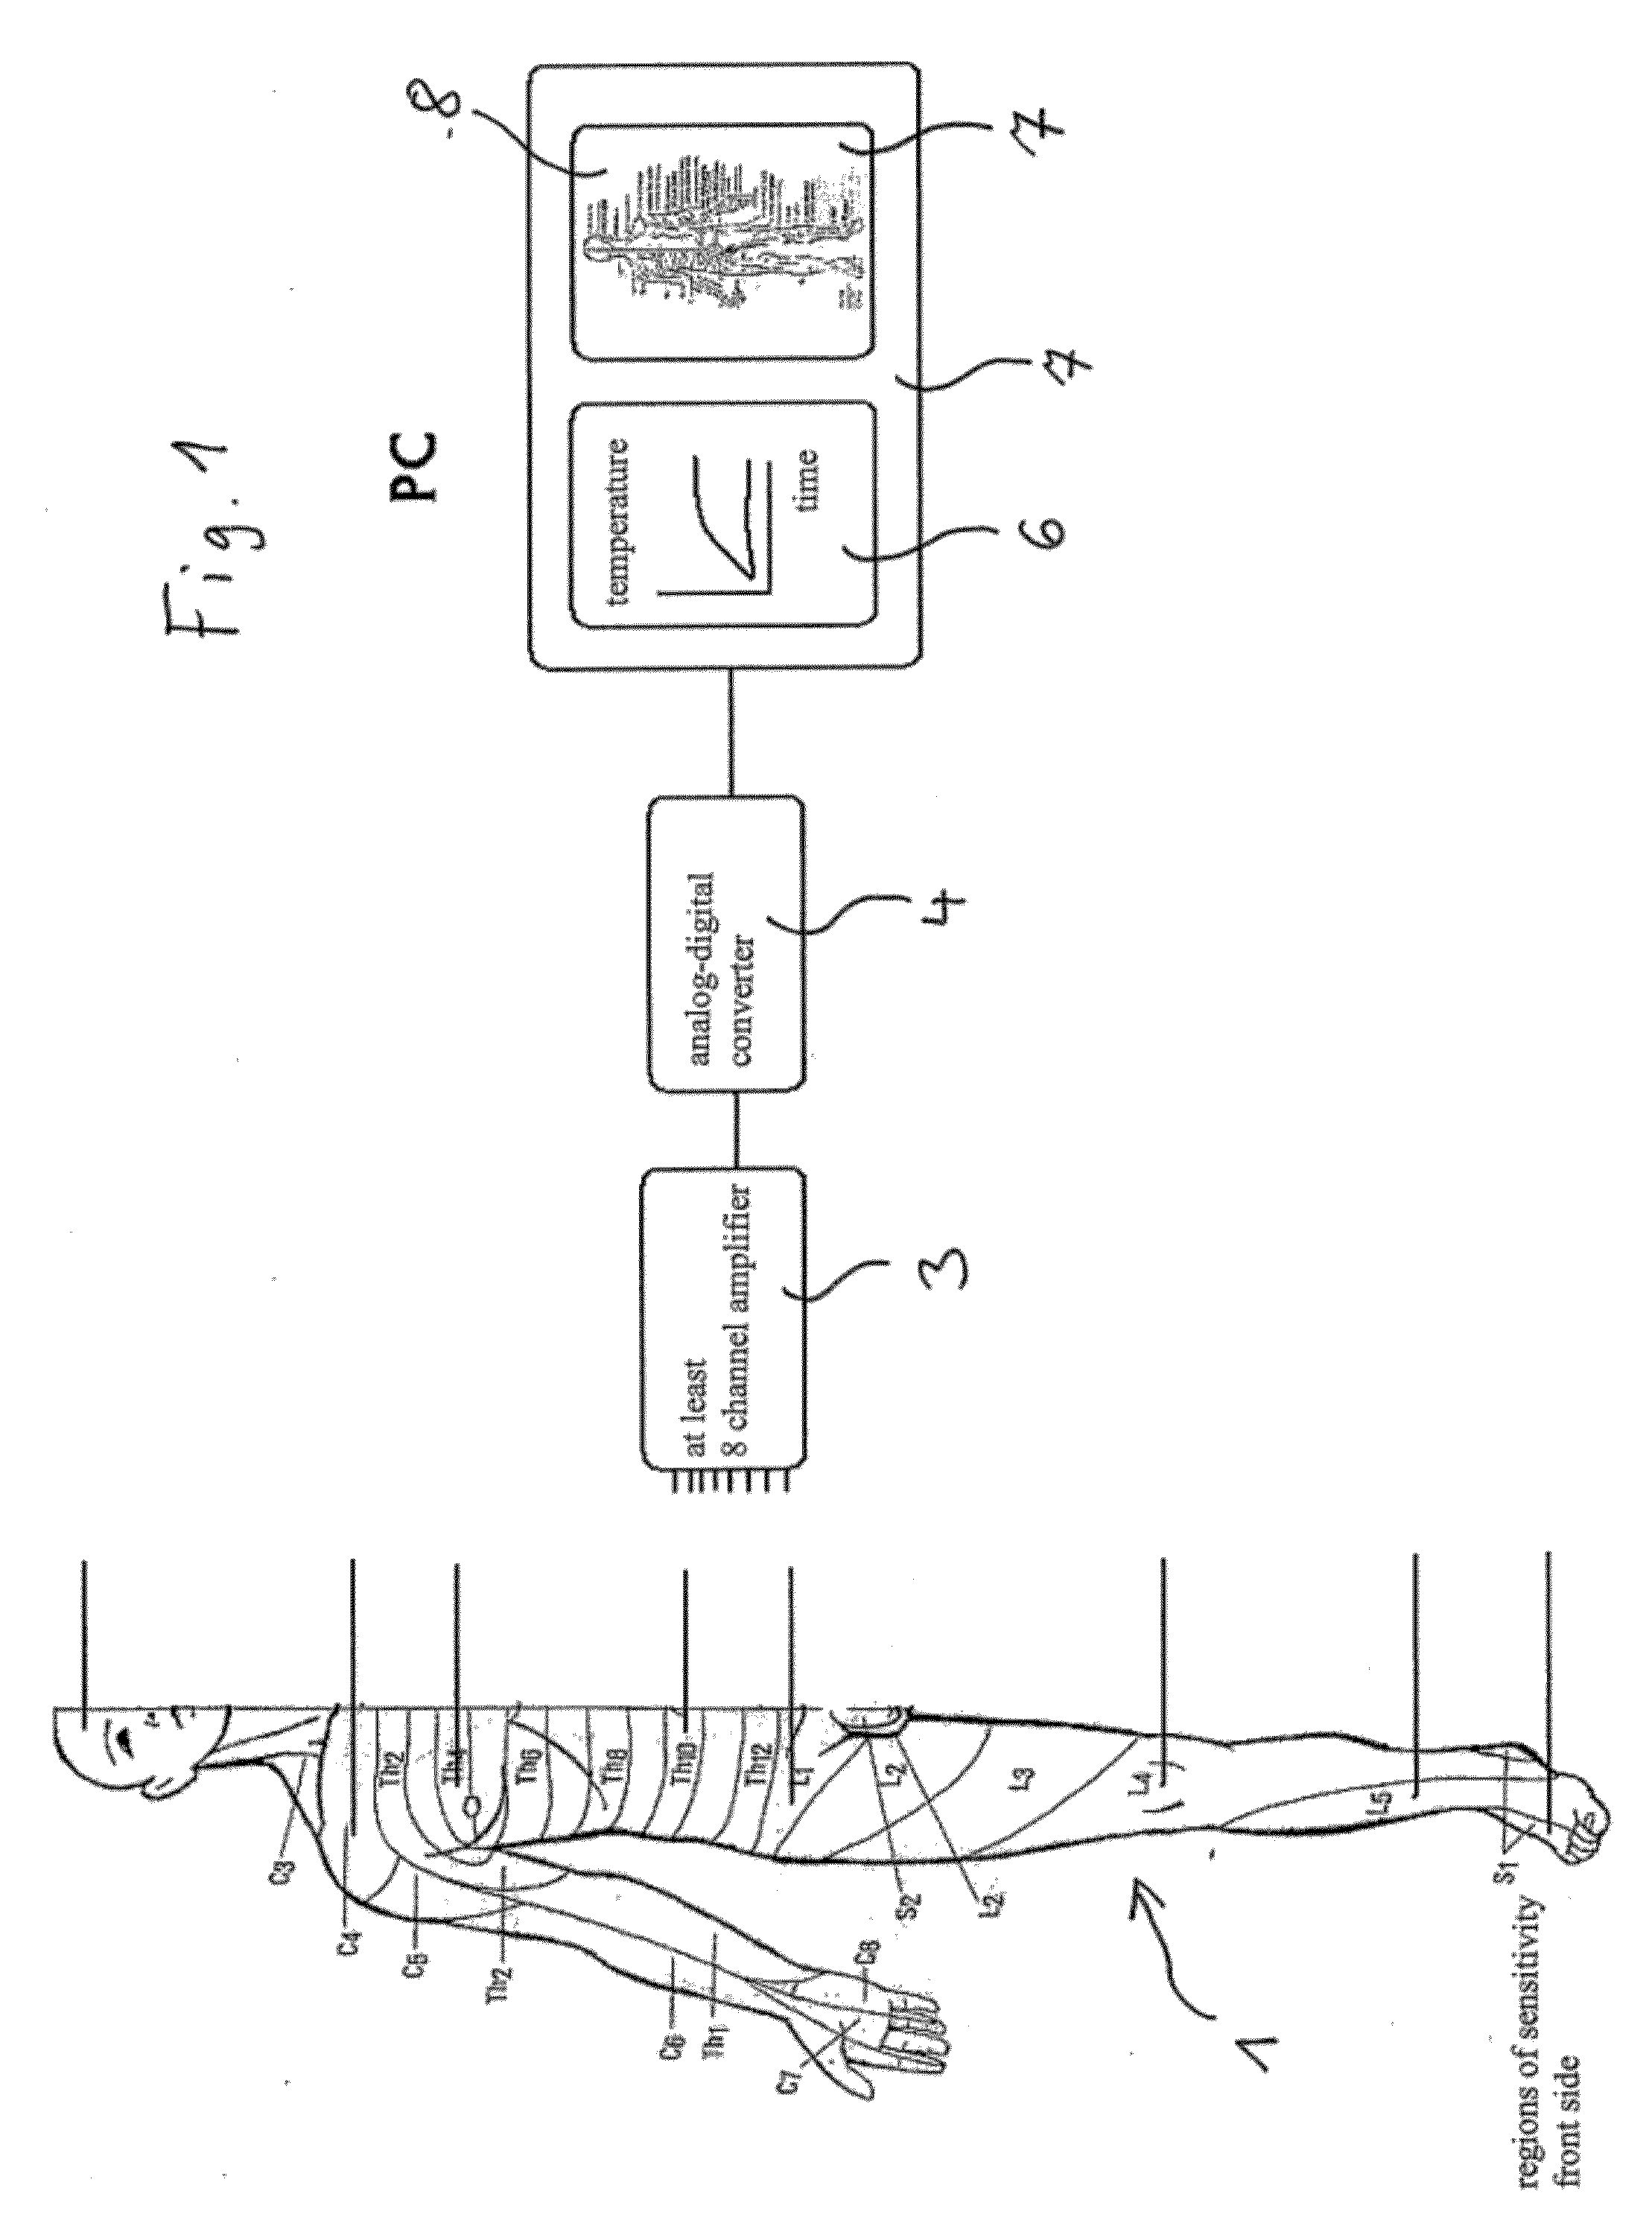 Device and method for monitoring the success of spinal anesthesia